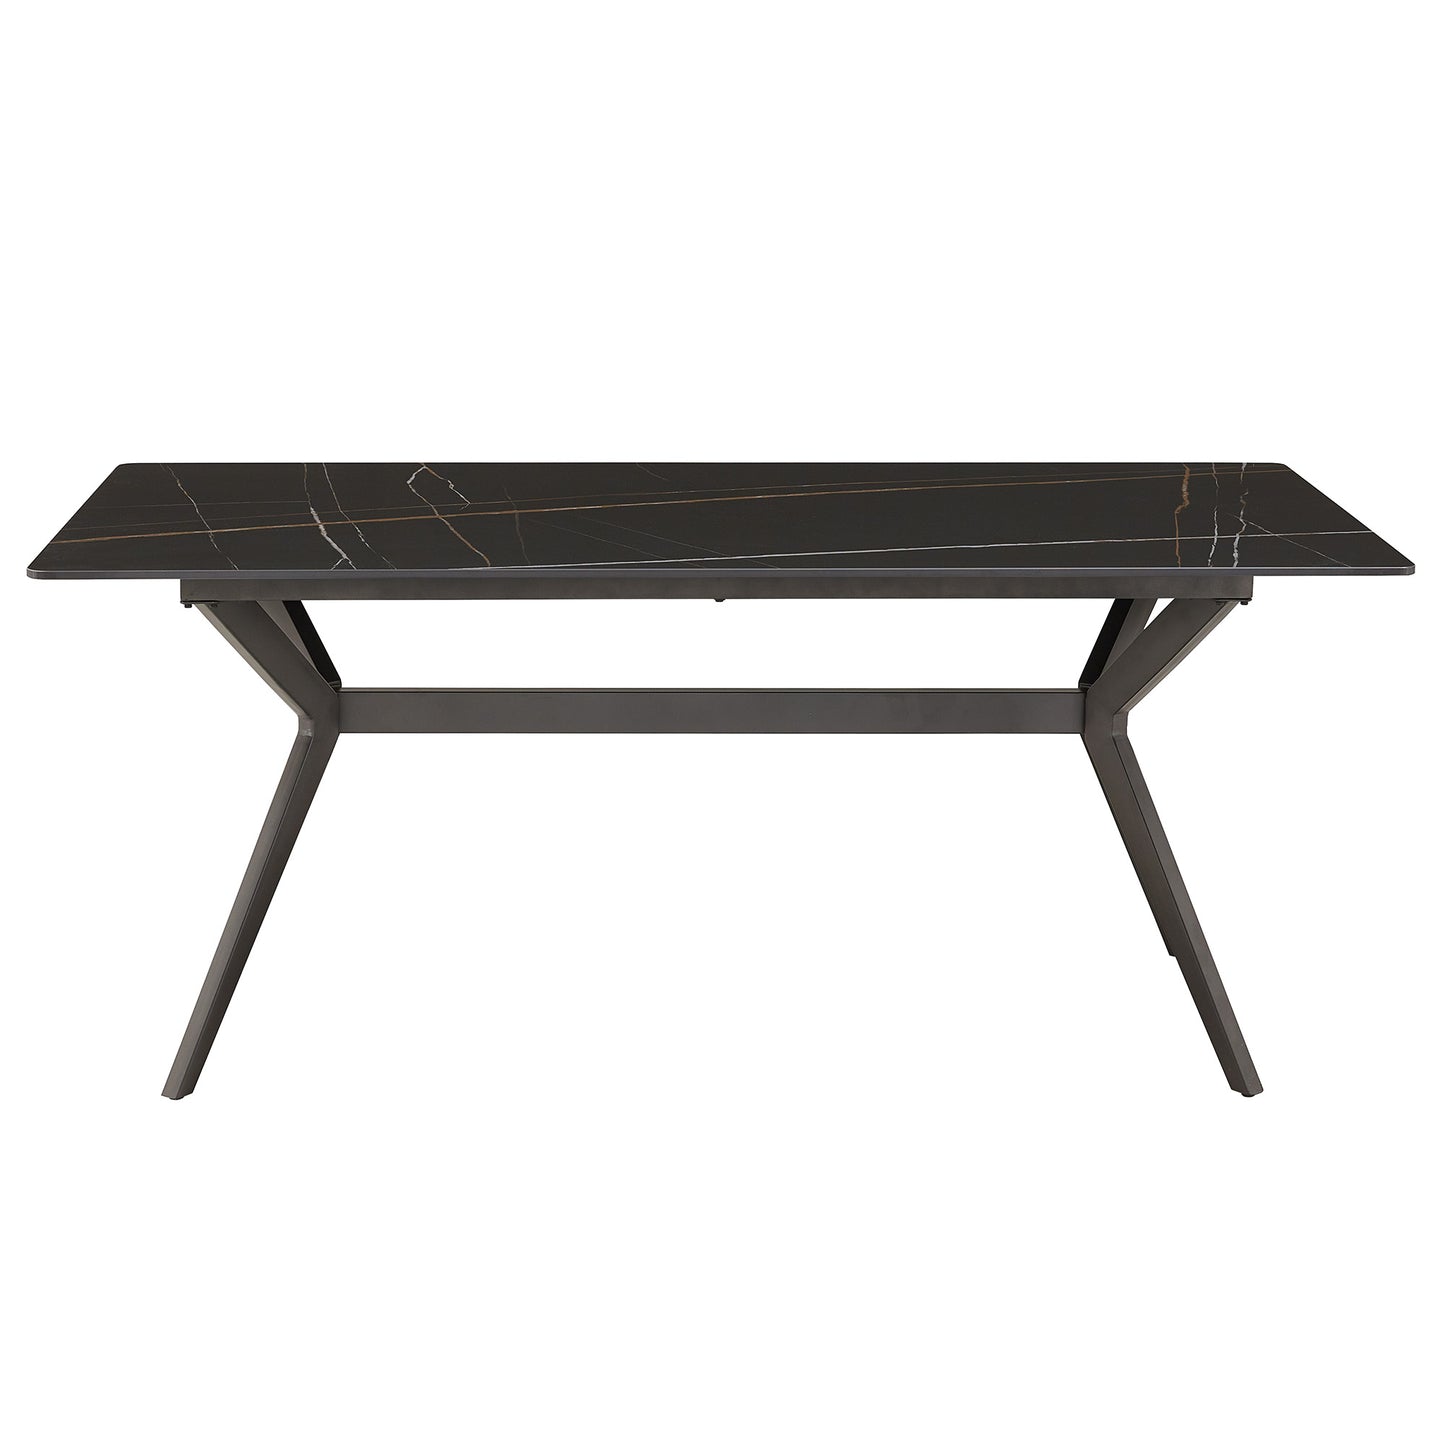 70" Iron Grey Metal Base 4-6 Person Dining Table - Black Sintered Stone Top